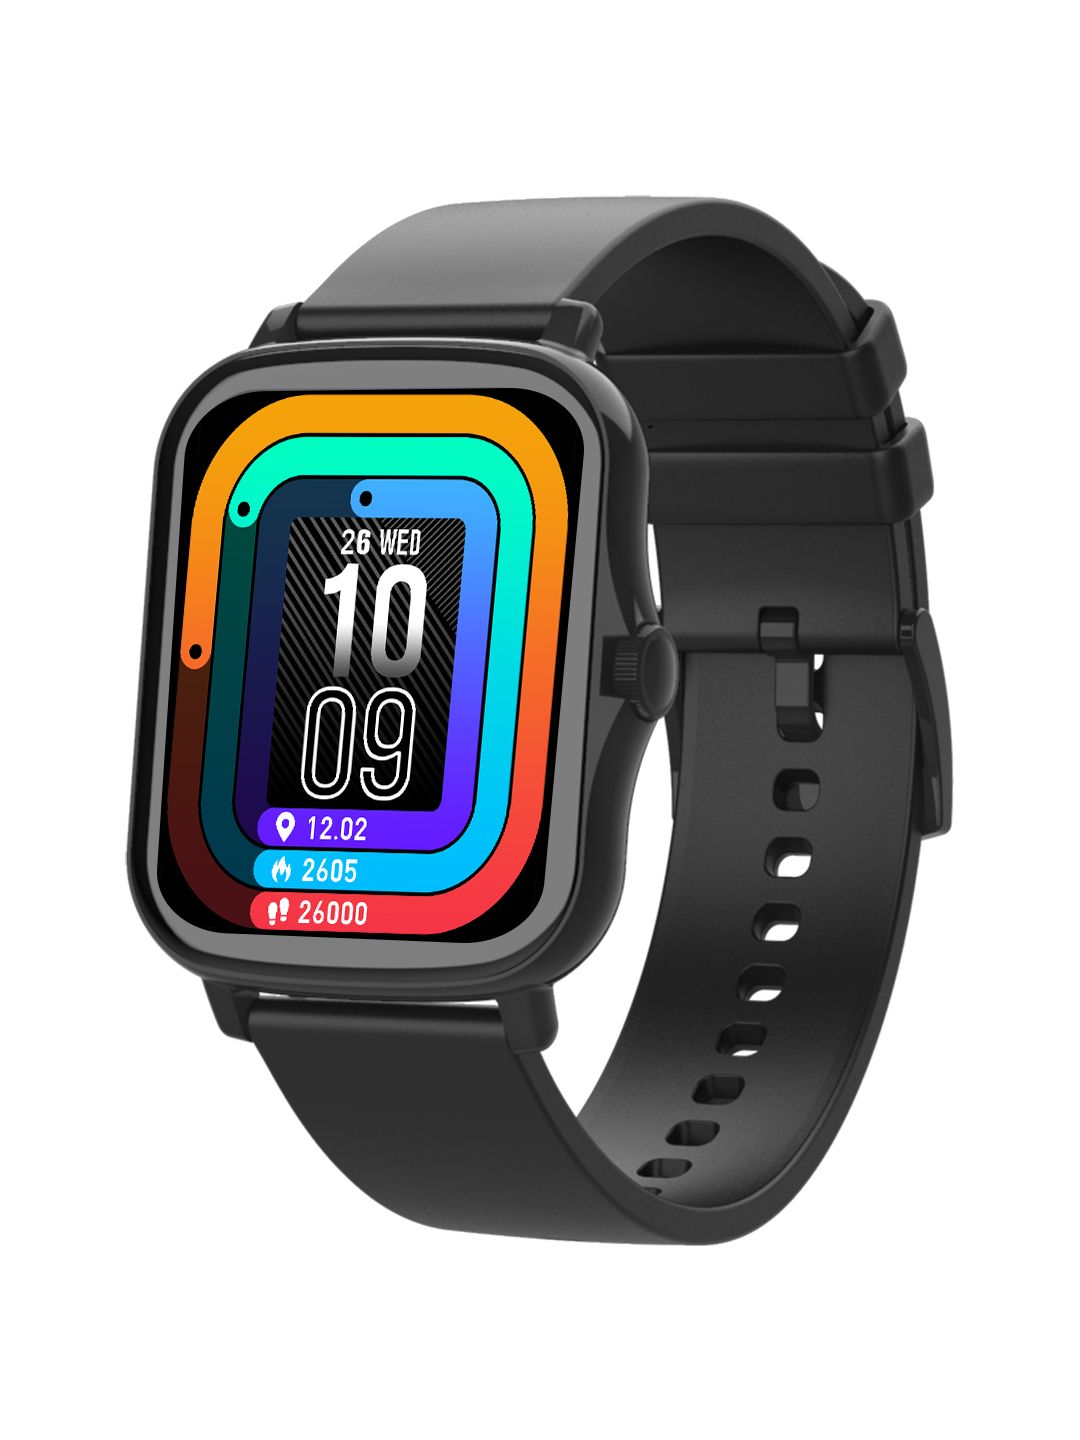 Fire-Boltt Beast Industry Largest Display 1.69" Smartwatch - Black 02BSWAAY Price in India